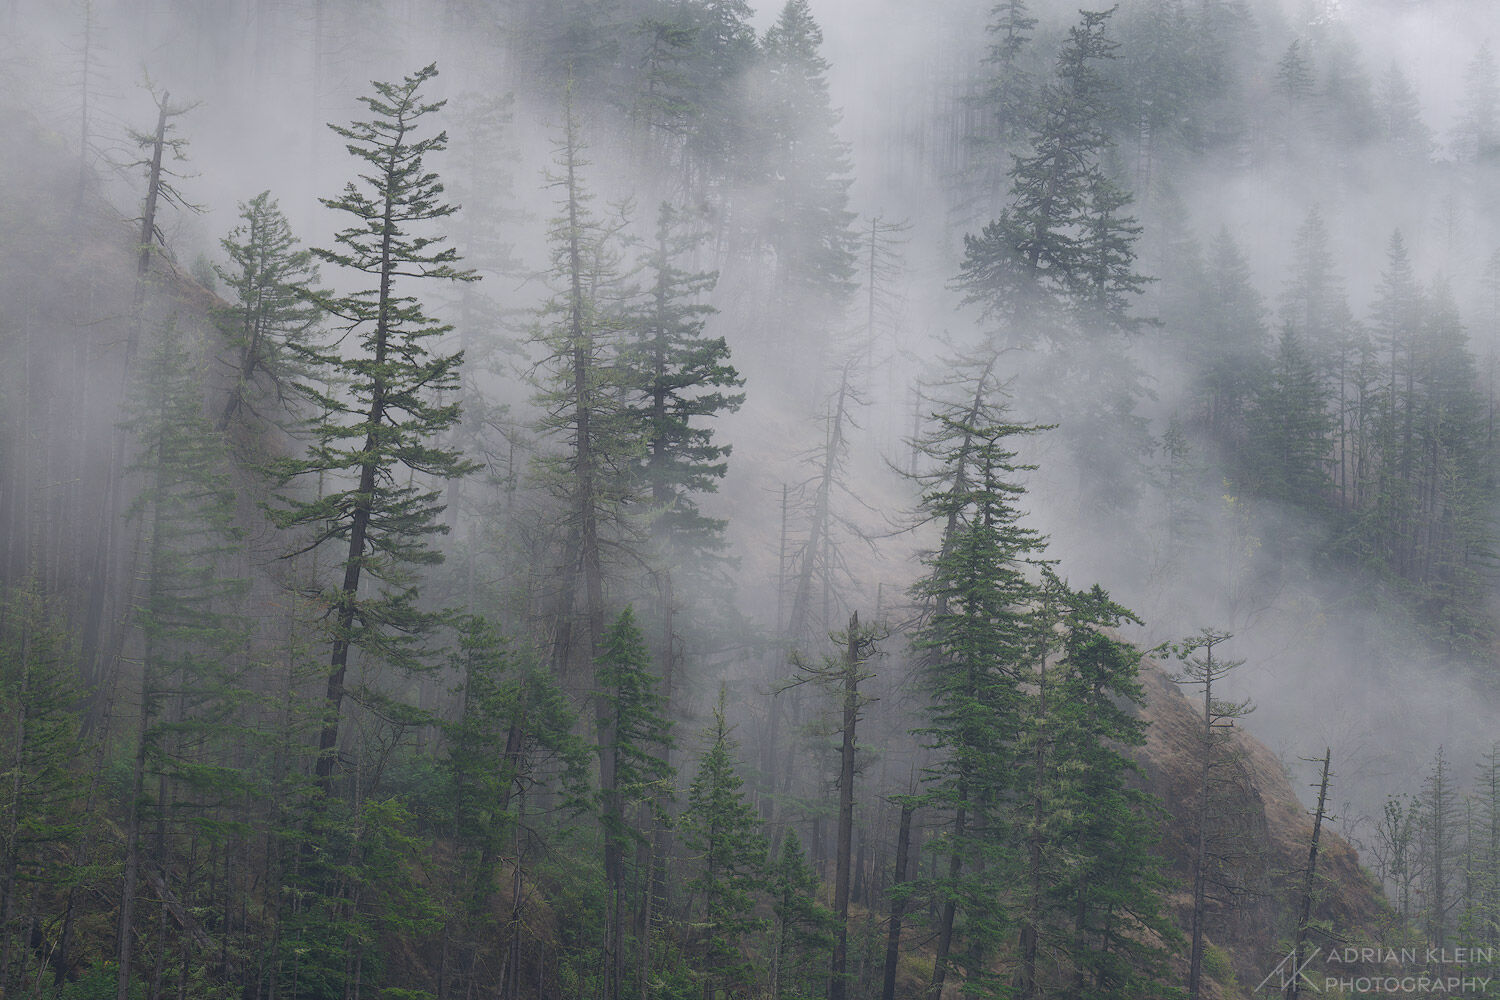 A forest in the cascade mountains of Oregon filled with thick foggy air.